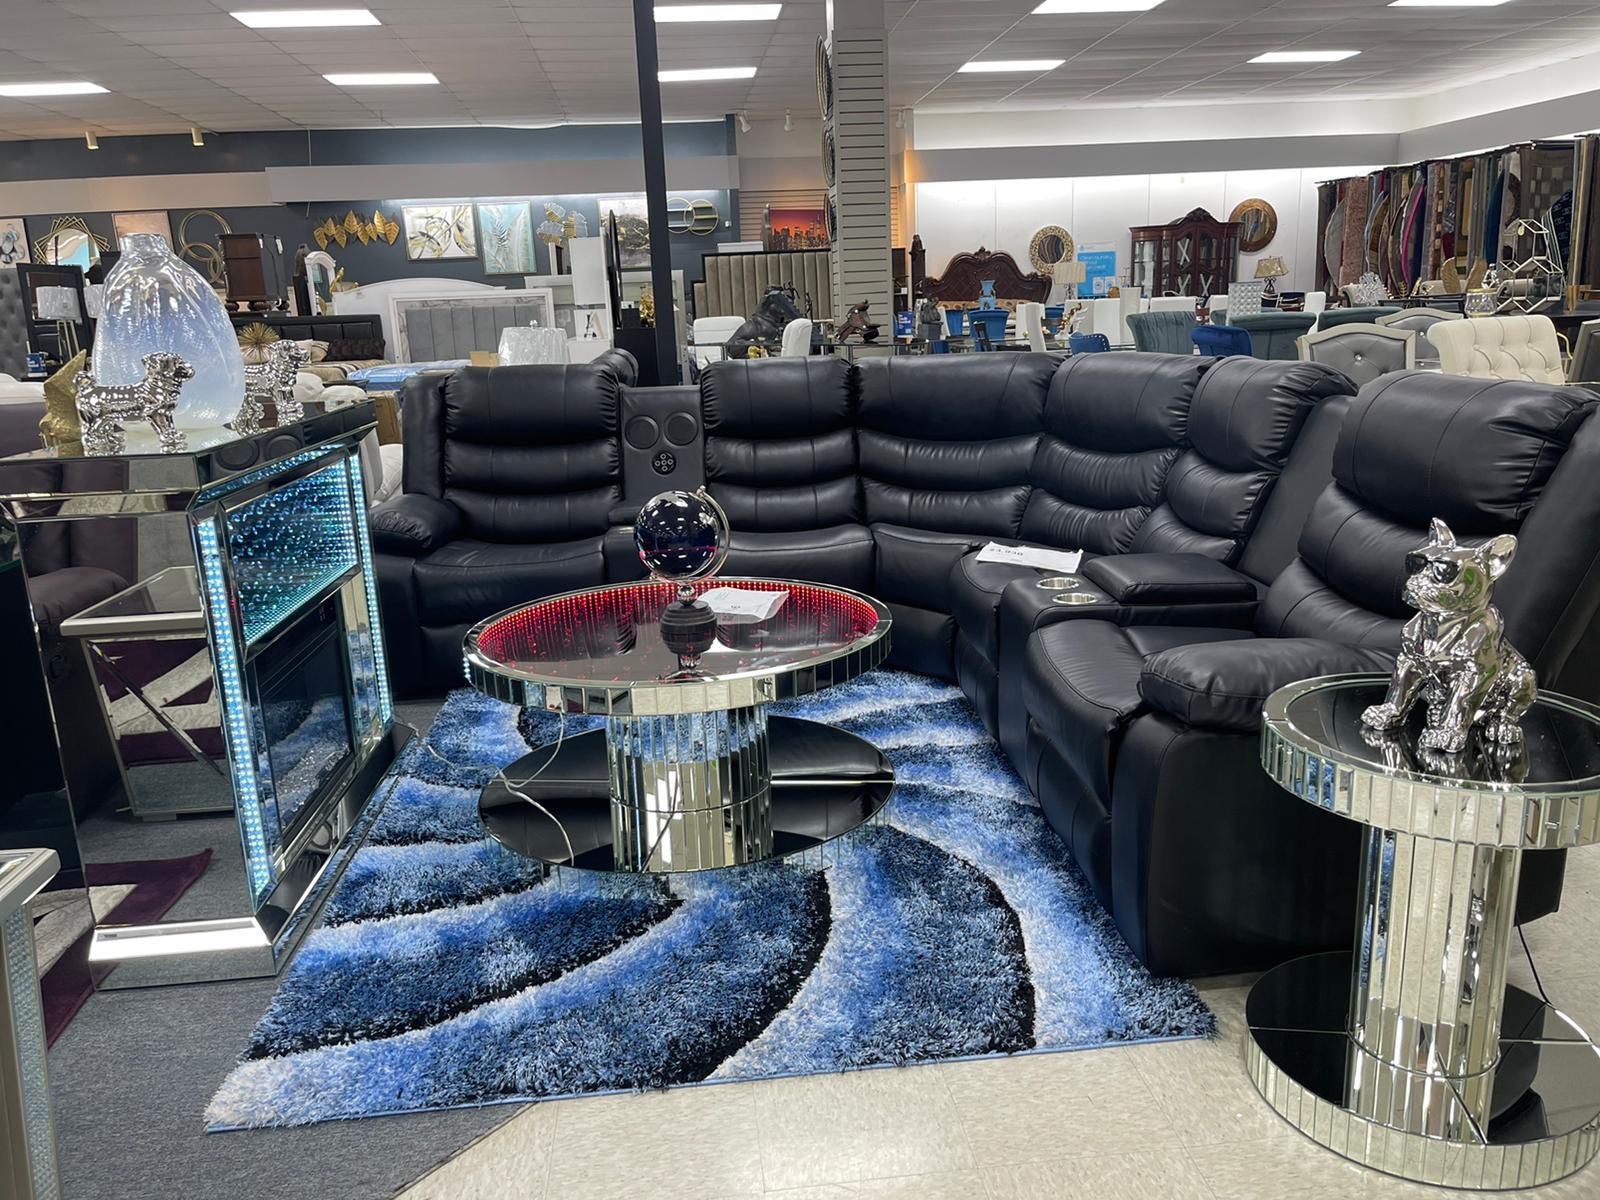 Black leather sectional take it home with $10down